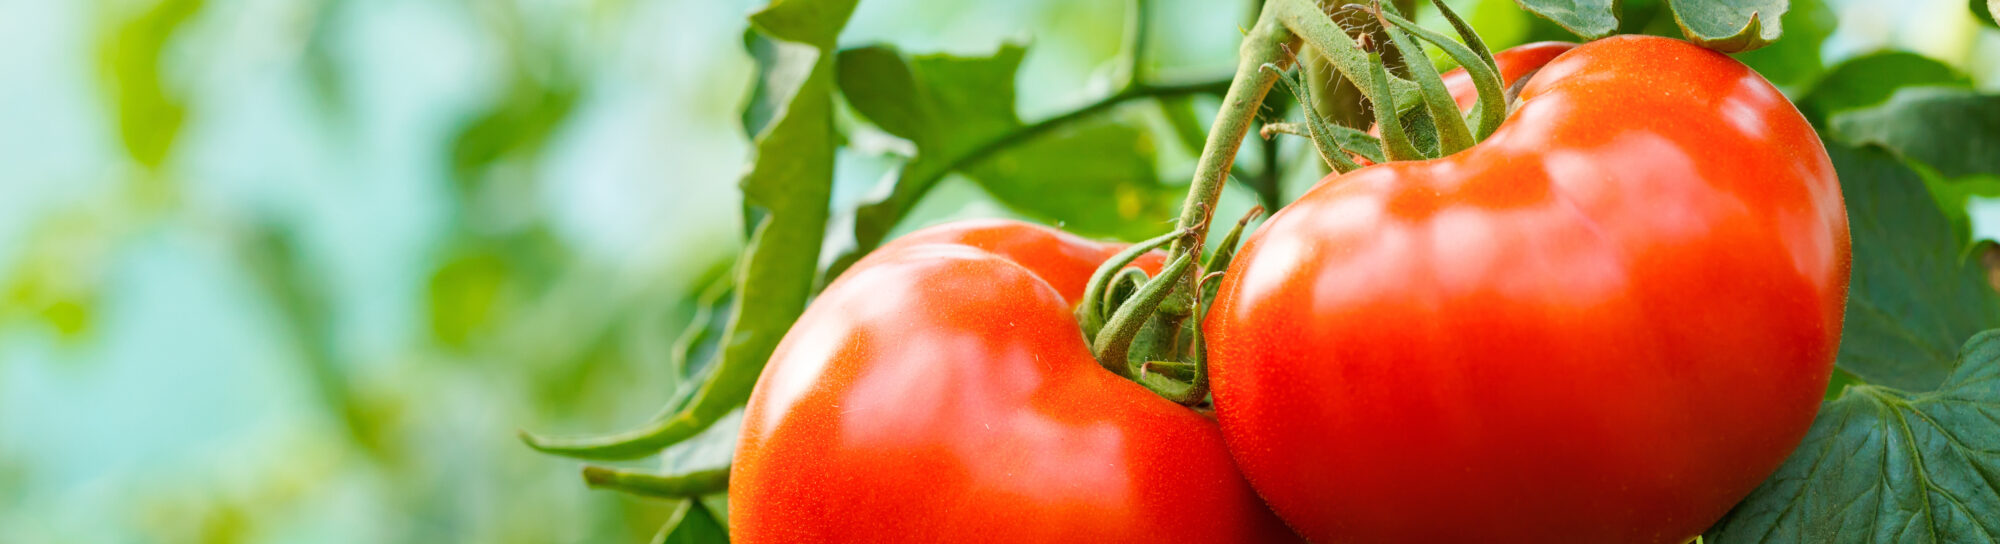 Tomatoes with high amino acid content